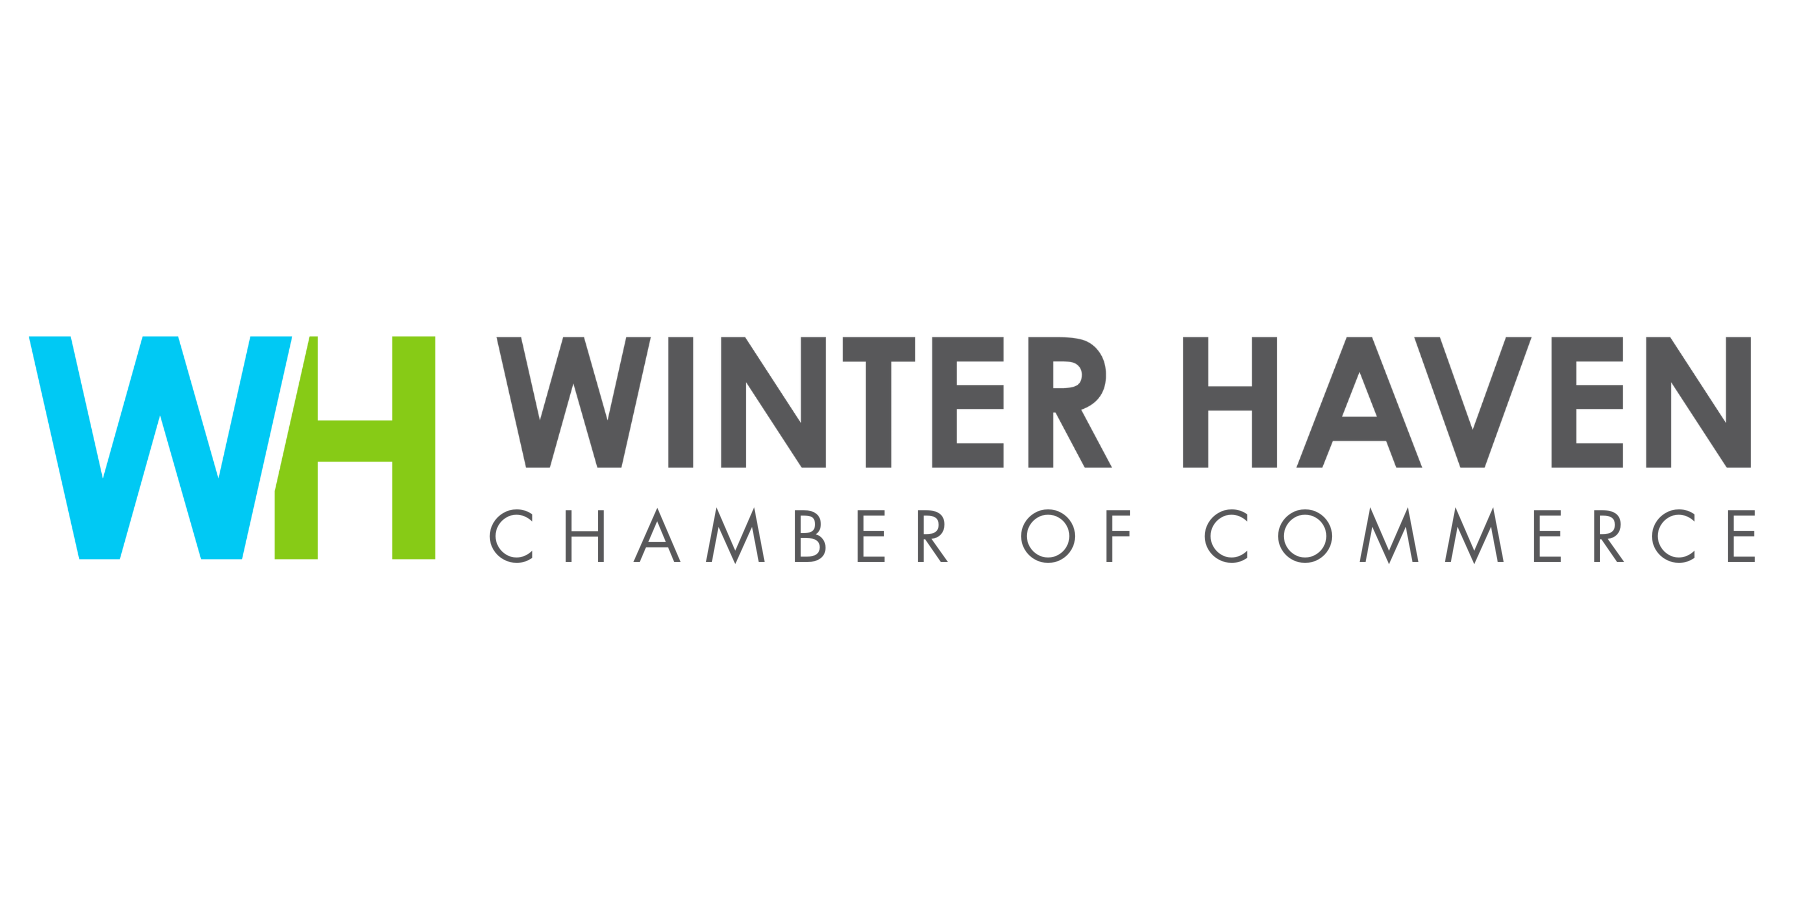 Winter Haven Chamber of Commerce Logo